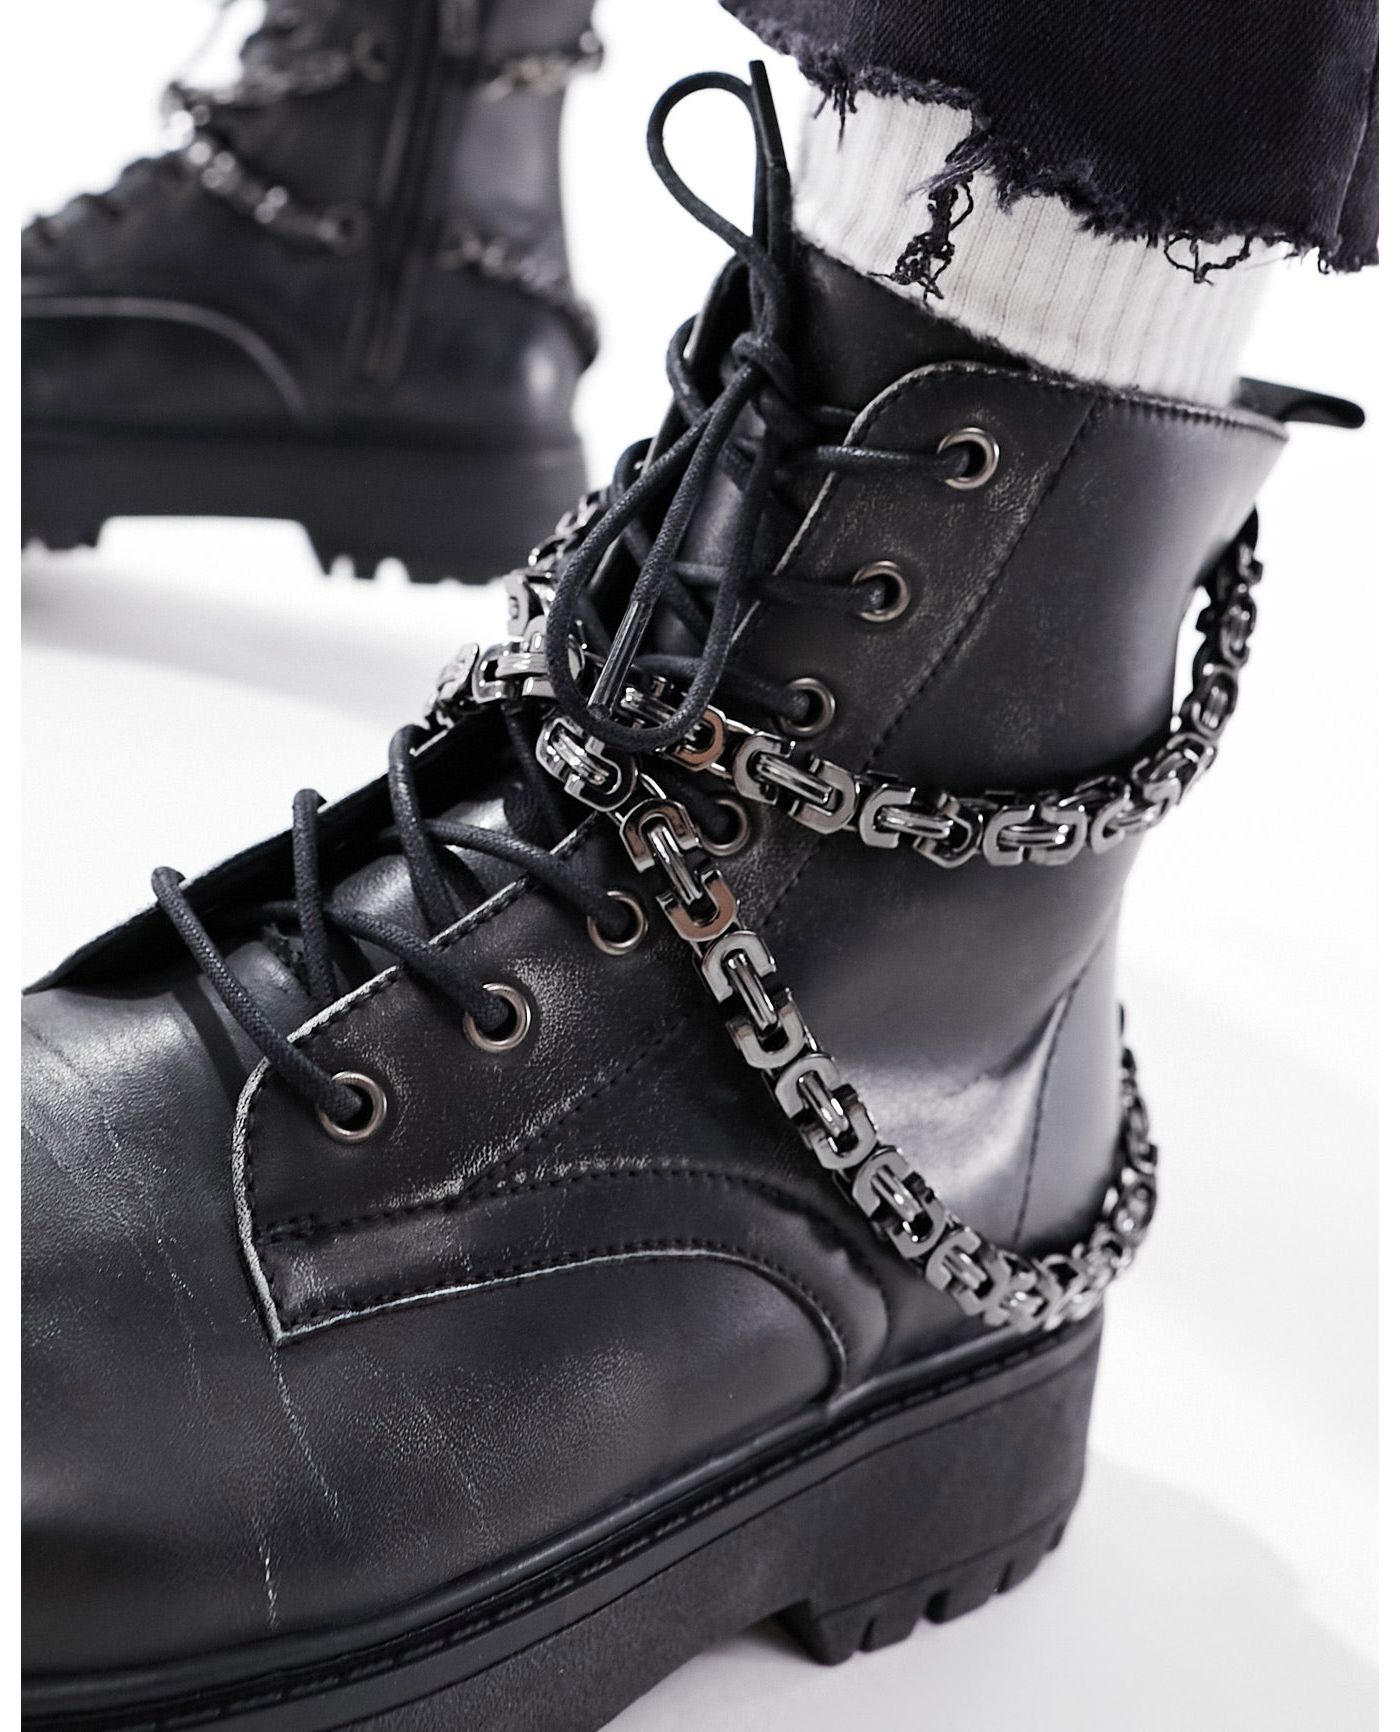 ASOS DESIGN lace up boot in black faux leather with chunky sole and studs